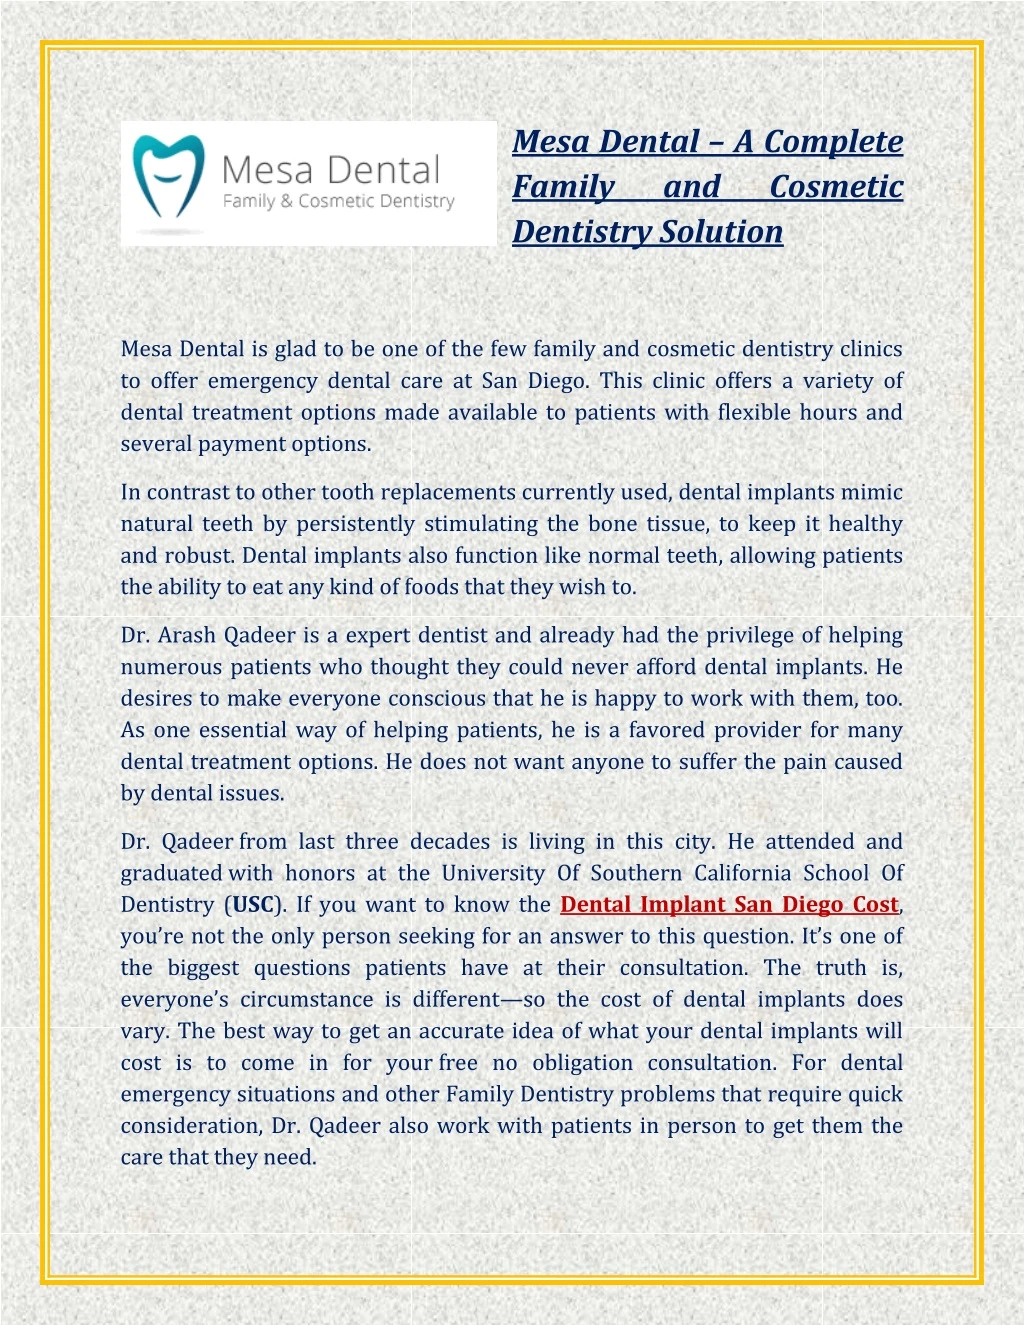 mesa dental a complete family and dentistry